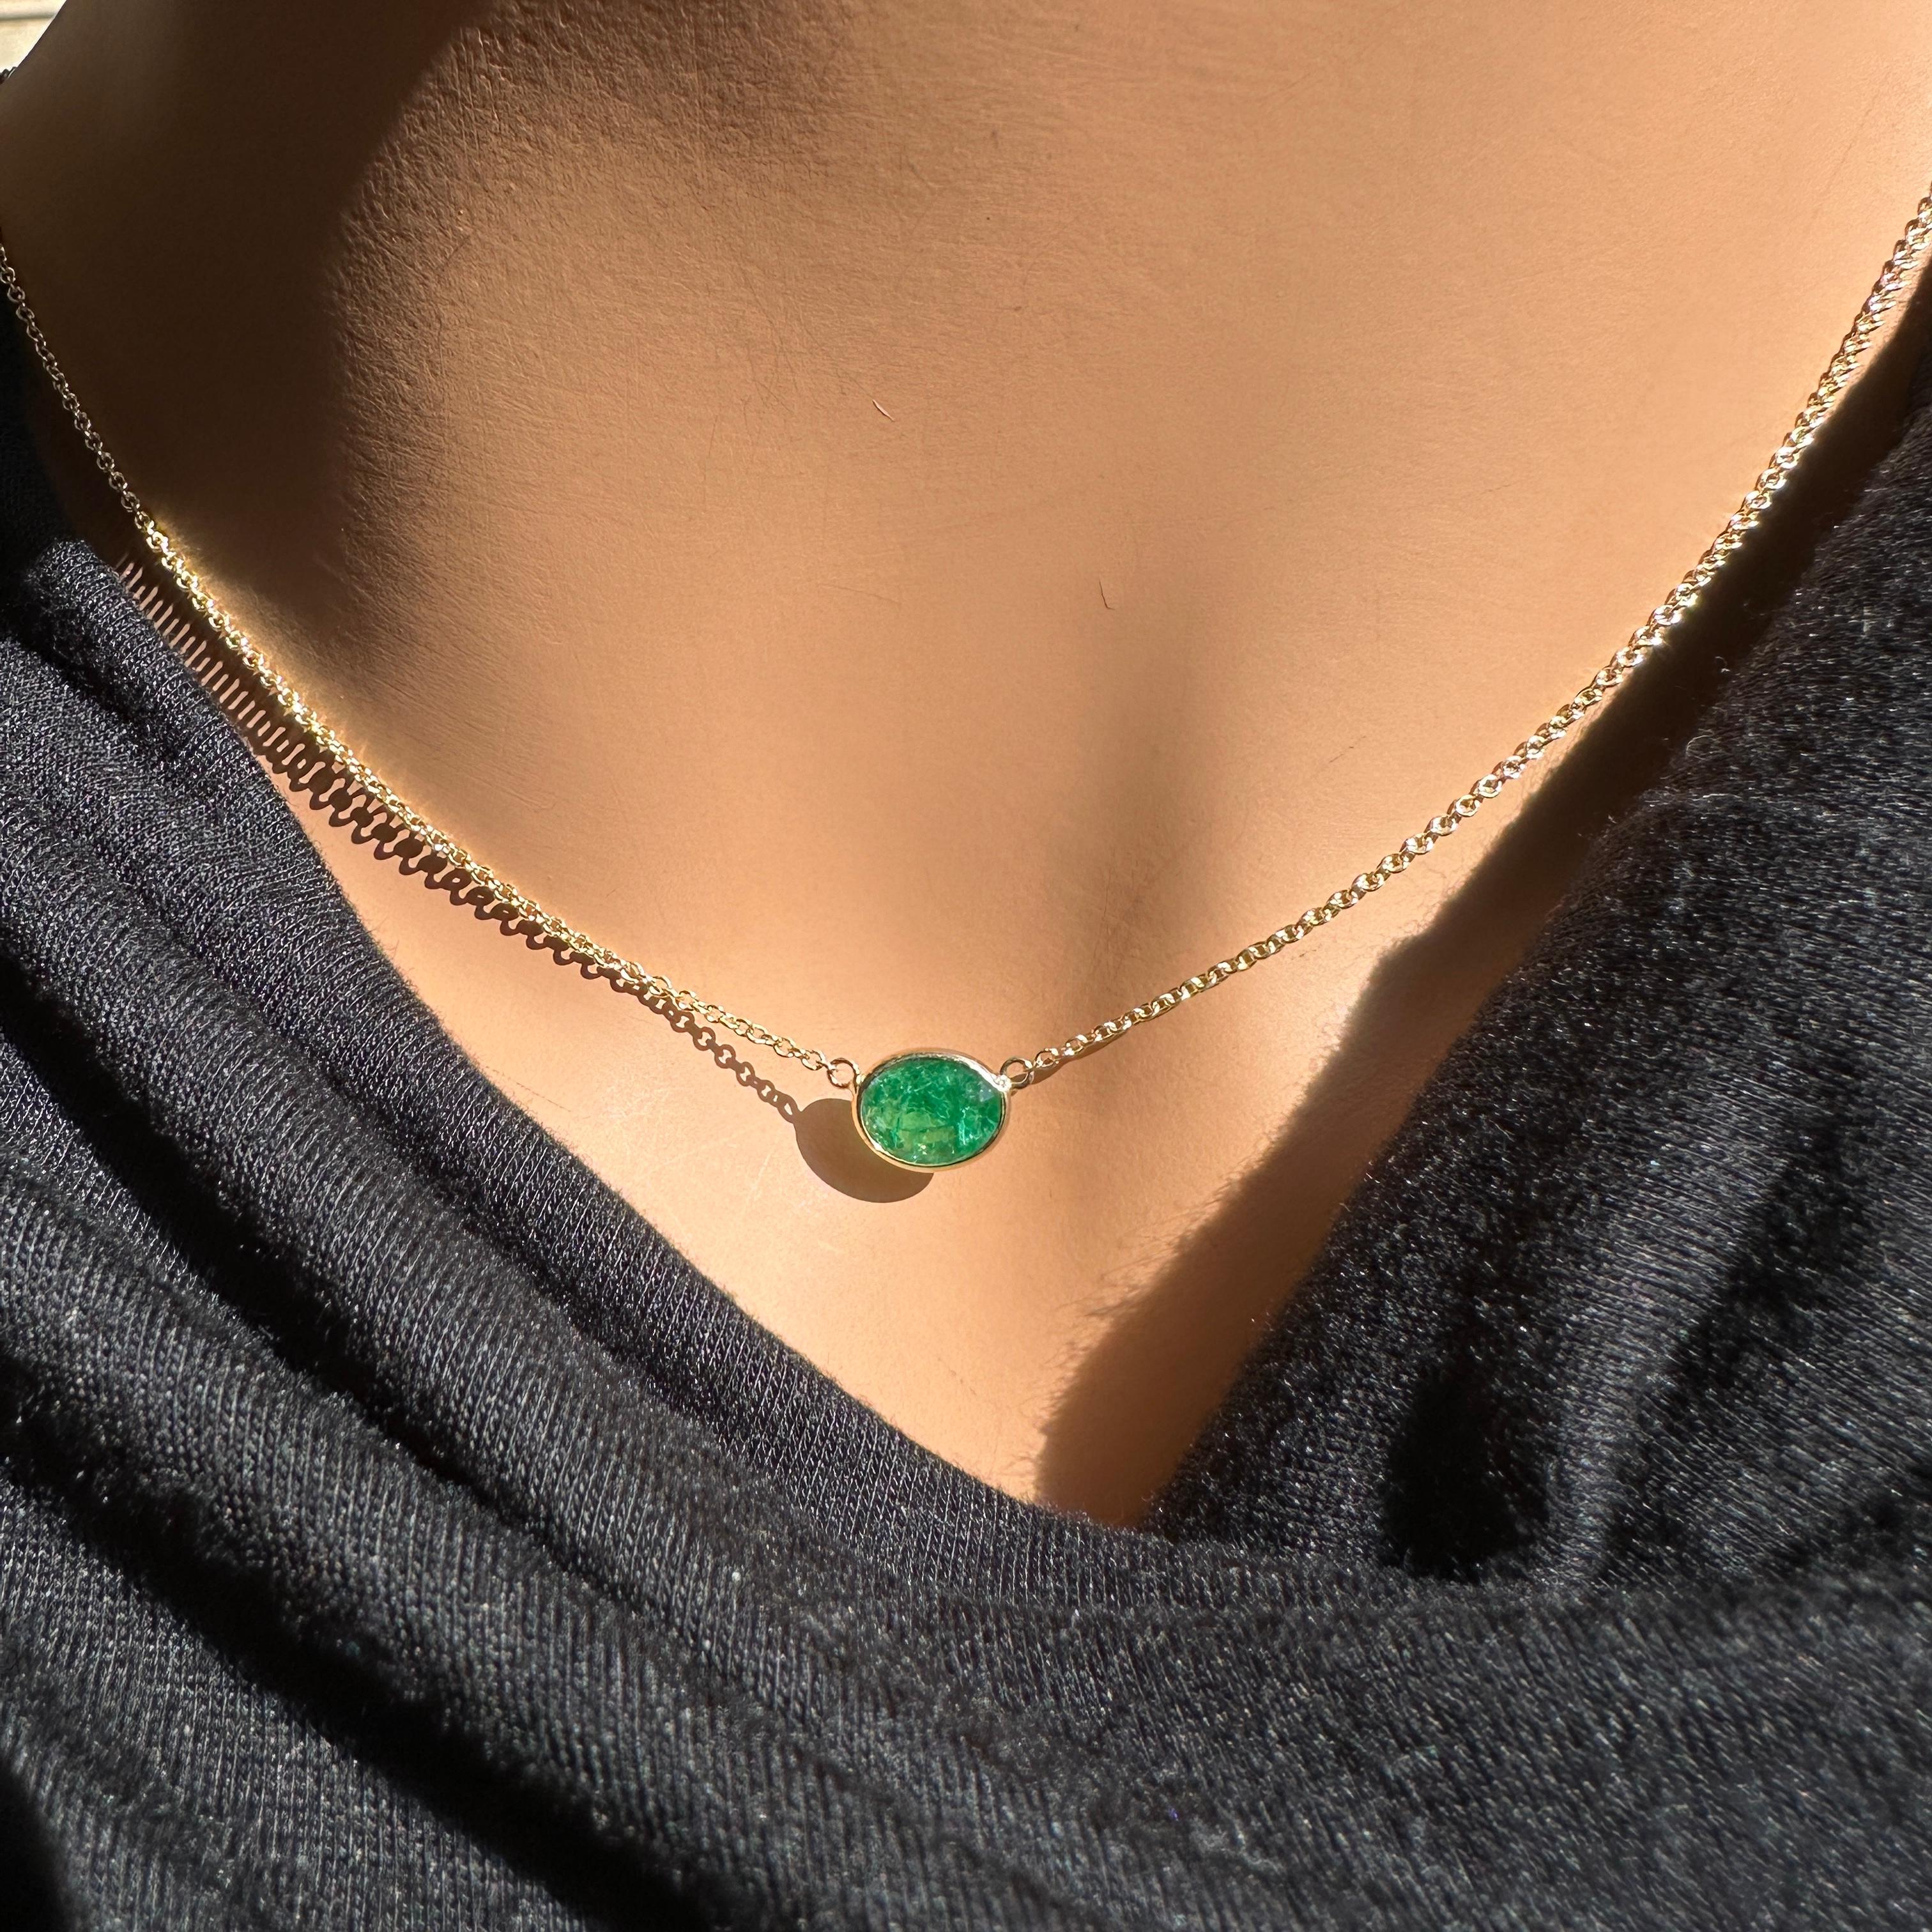 A fashion necklace made of 14k yellow gold with a main stone of an oval-cut emerald weighing 1.32 carats and certified by IGITL would be a stunning and sophisticated choice. Emeralds are renowned for their captivating green color and timeless